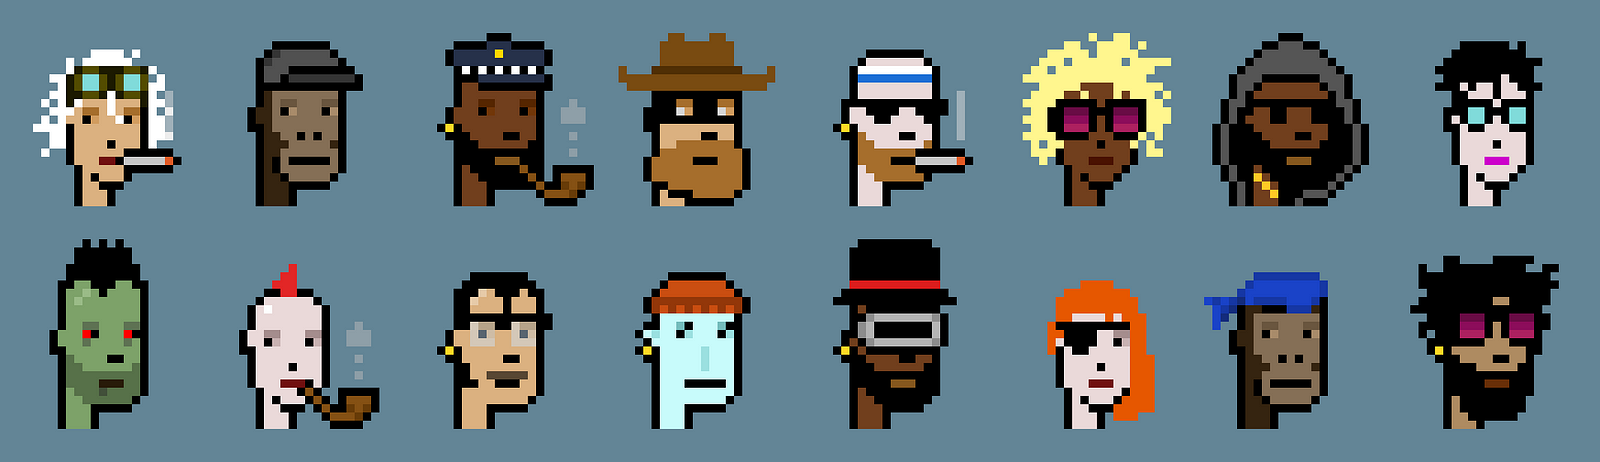 16 pixelated faces known as CryptoPunks.